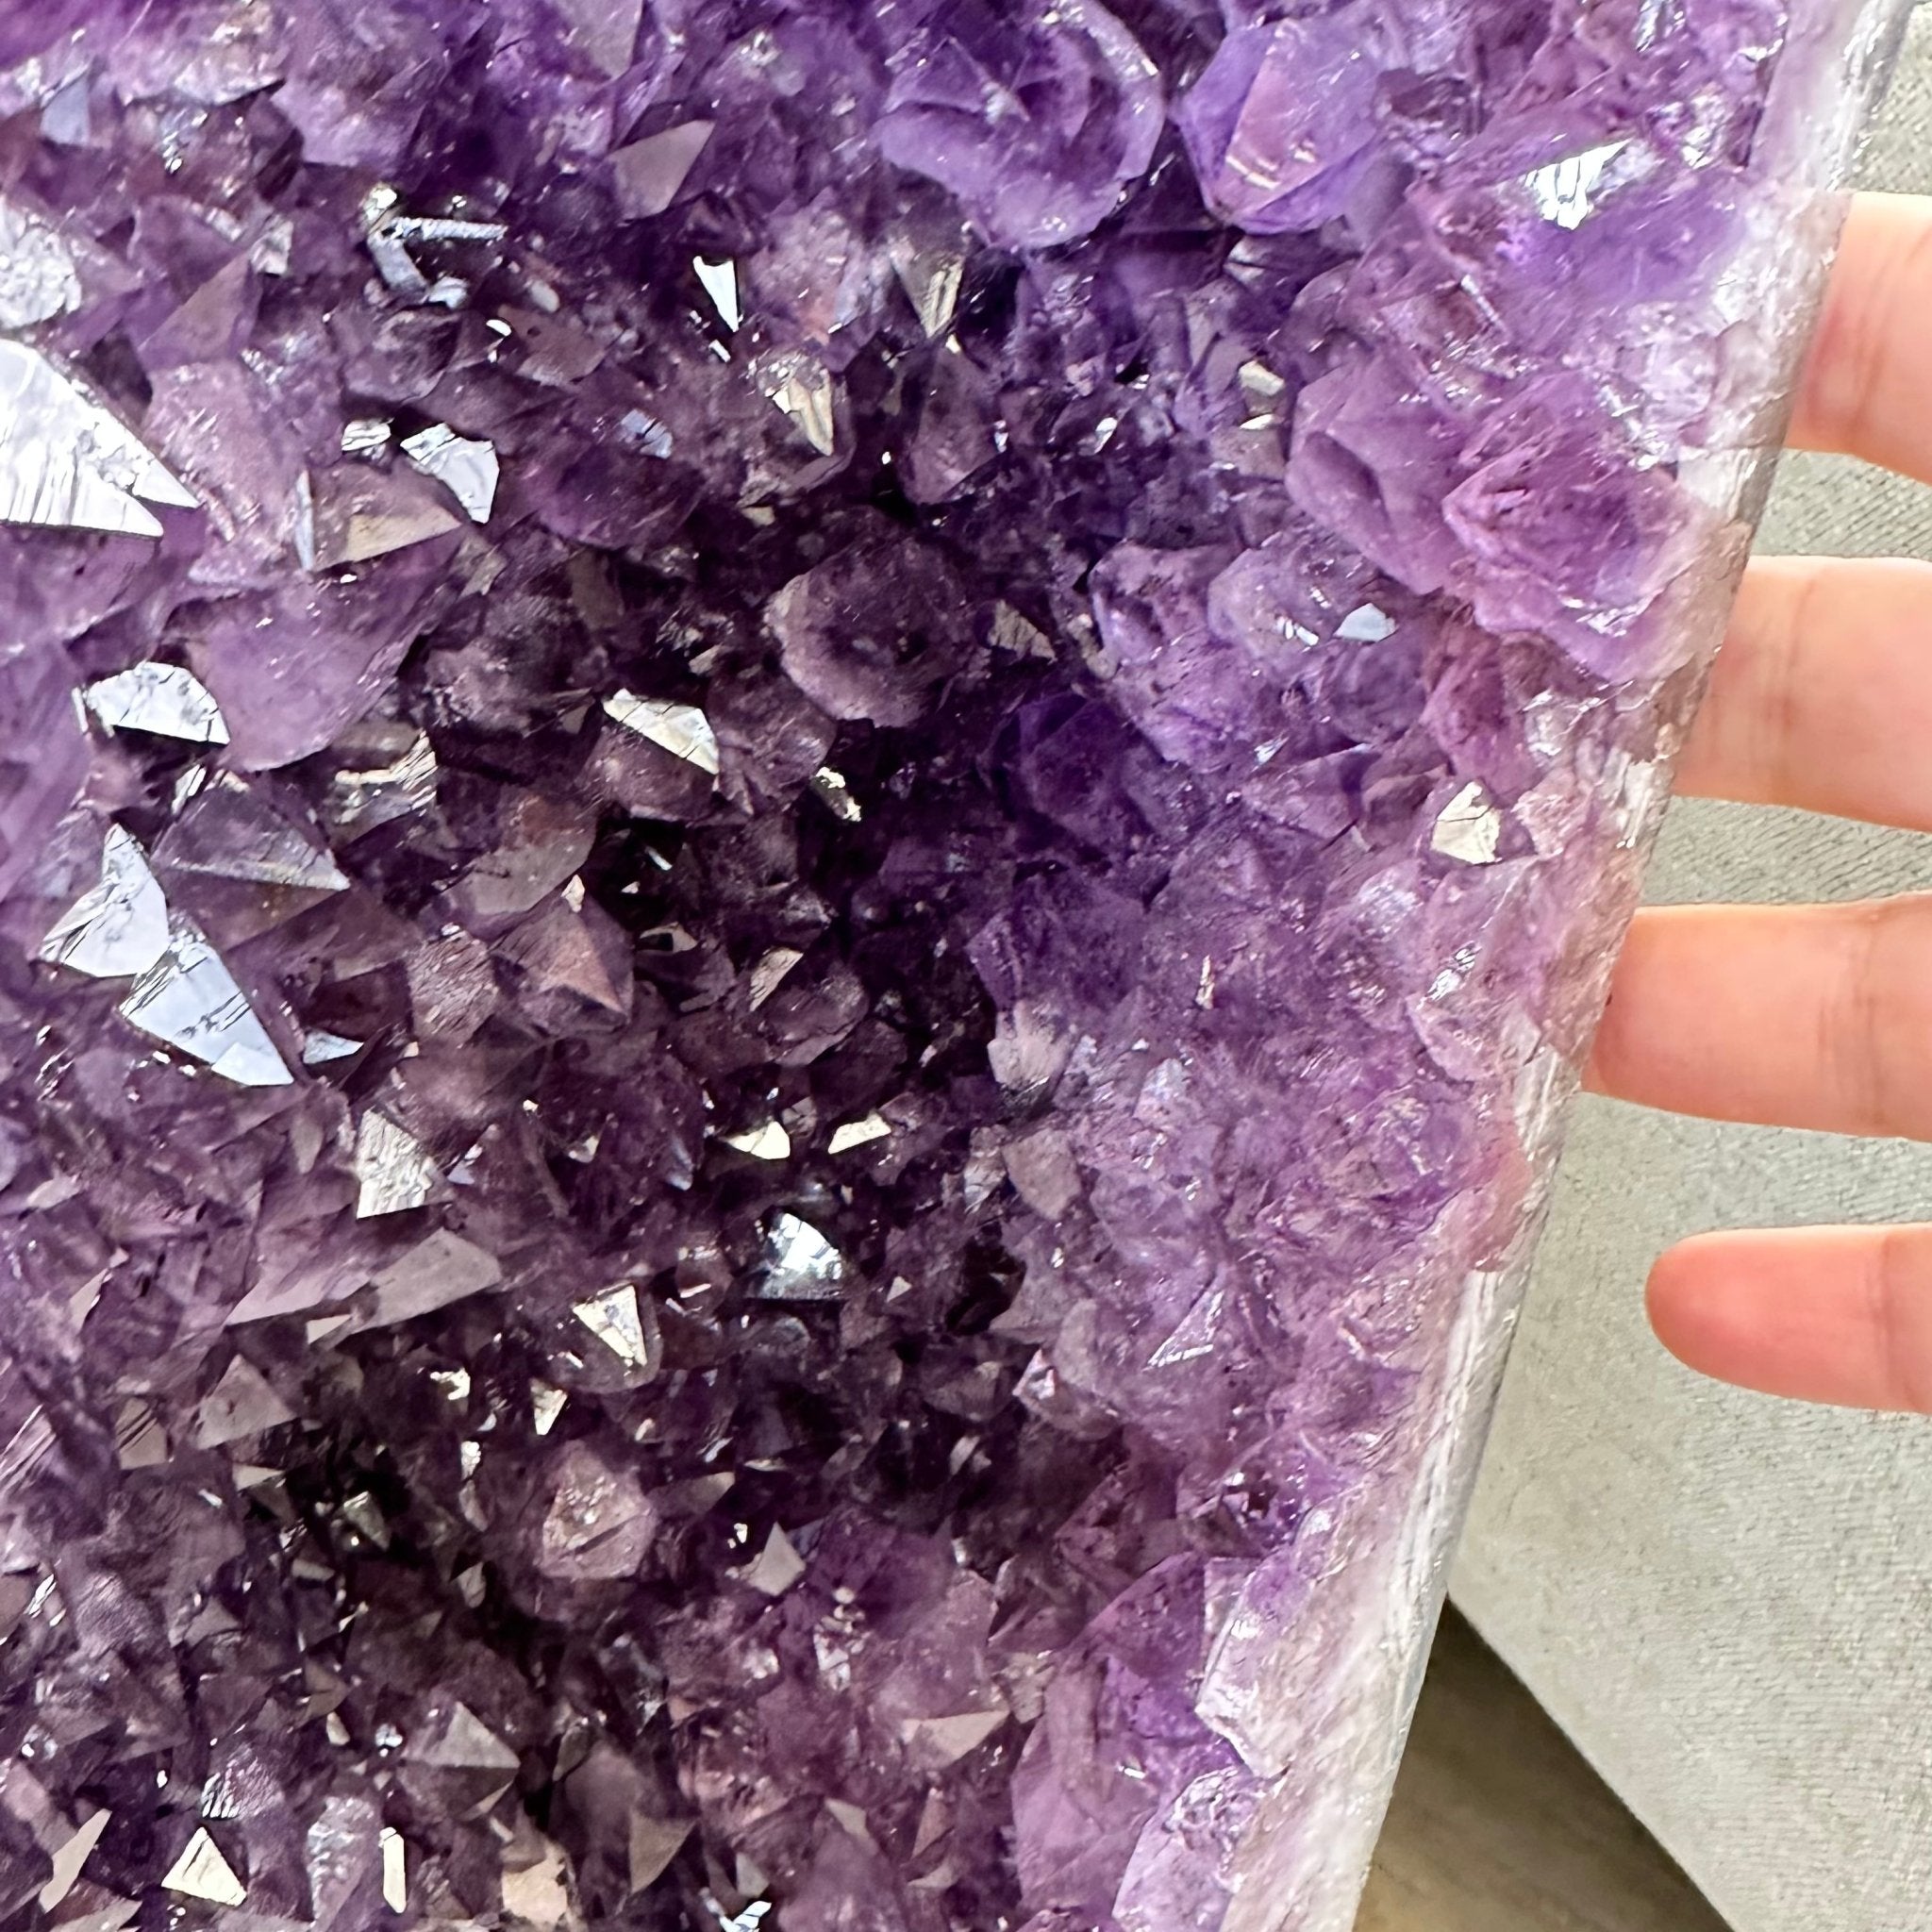 Extra Quality Brazilian Amethyst Cathedral, 103.6 lbs & 43" Tall, Model #5601-1212 by Brazil Gems - Brazil GemsBrazil GemsExtra Quality Brazilian Amethyst Cathedral, 103.6 lbs & 43" Tall, Model #5601-1212 by Brazil GemsCathedrals5601-1212